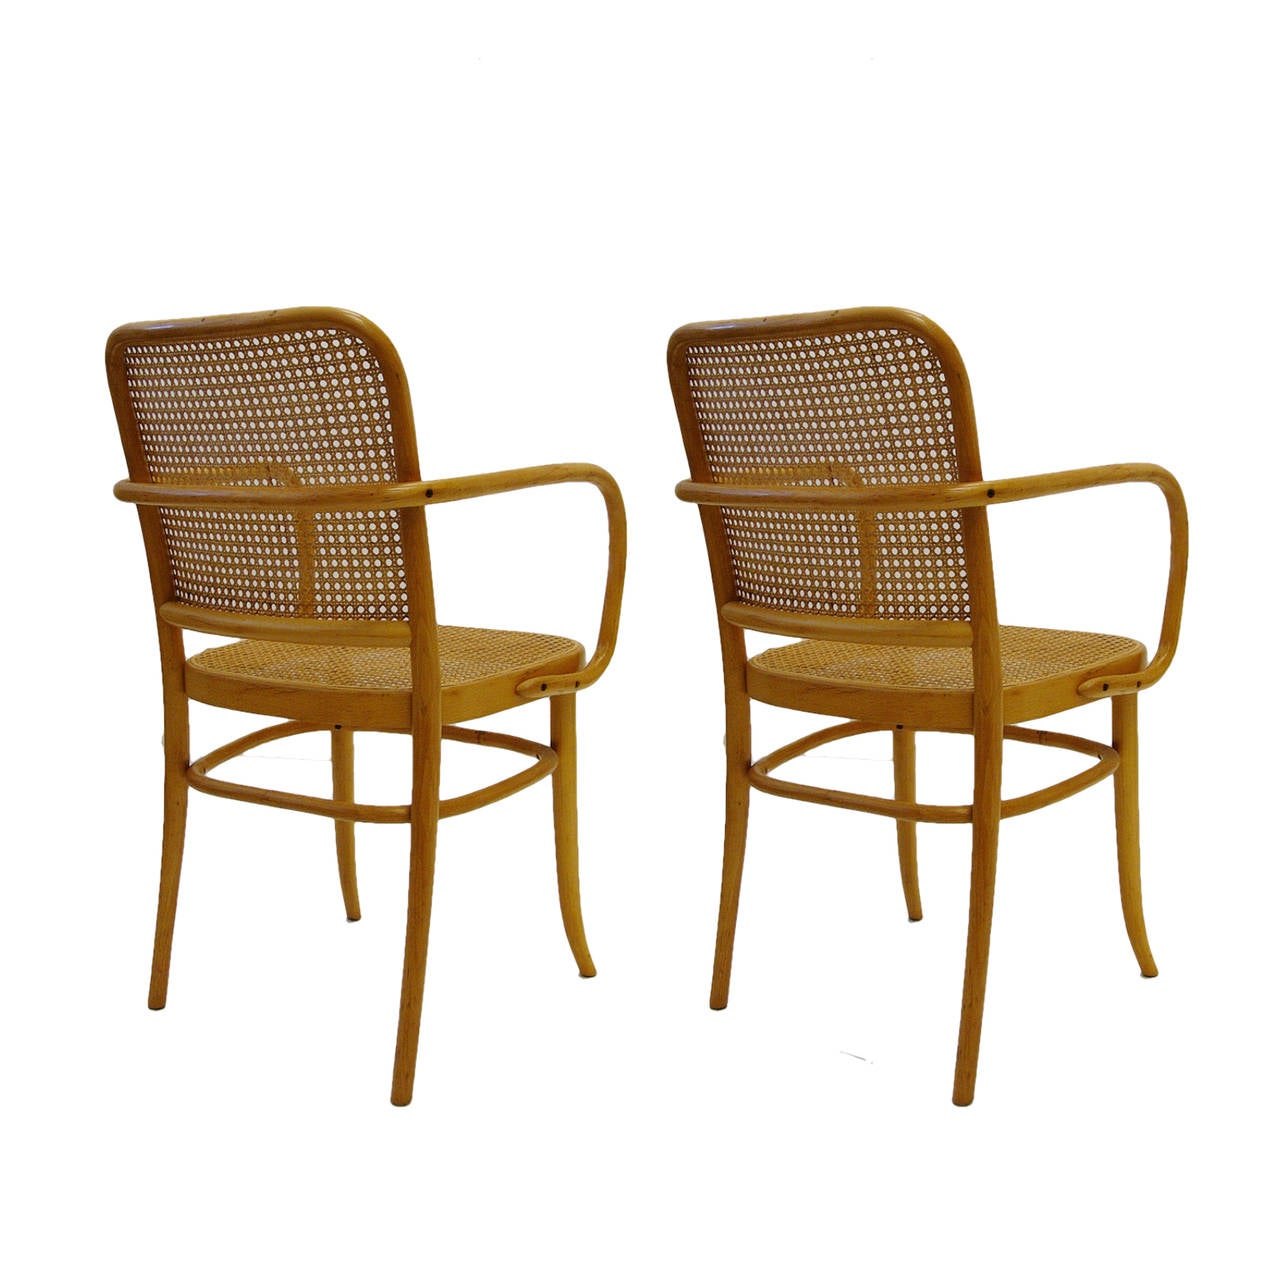 Vienna Secession Pair of Josef Hoffmann and Josef Frank Bentwood Chairs